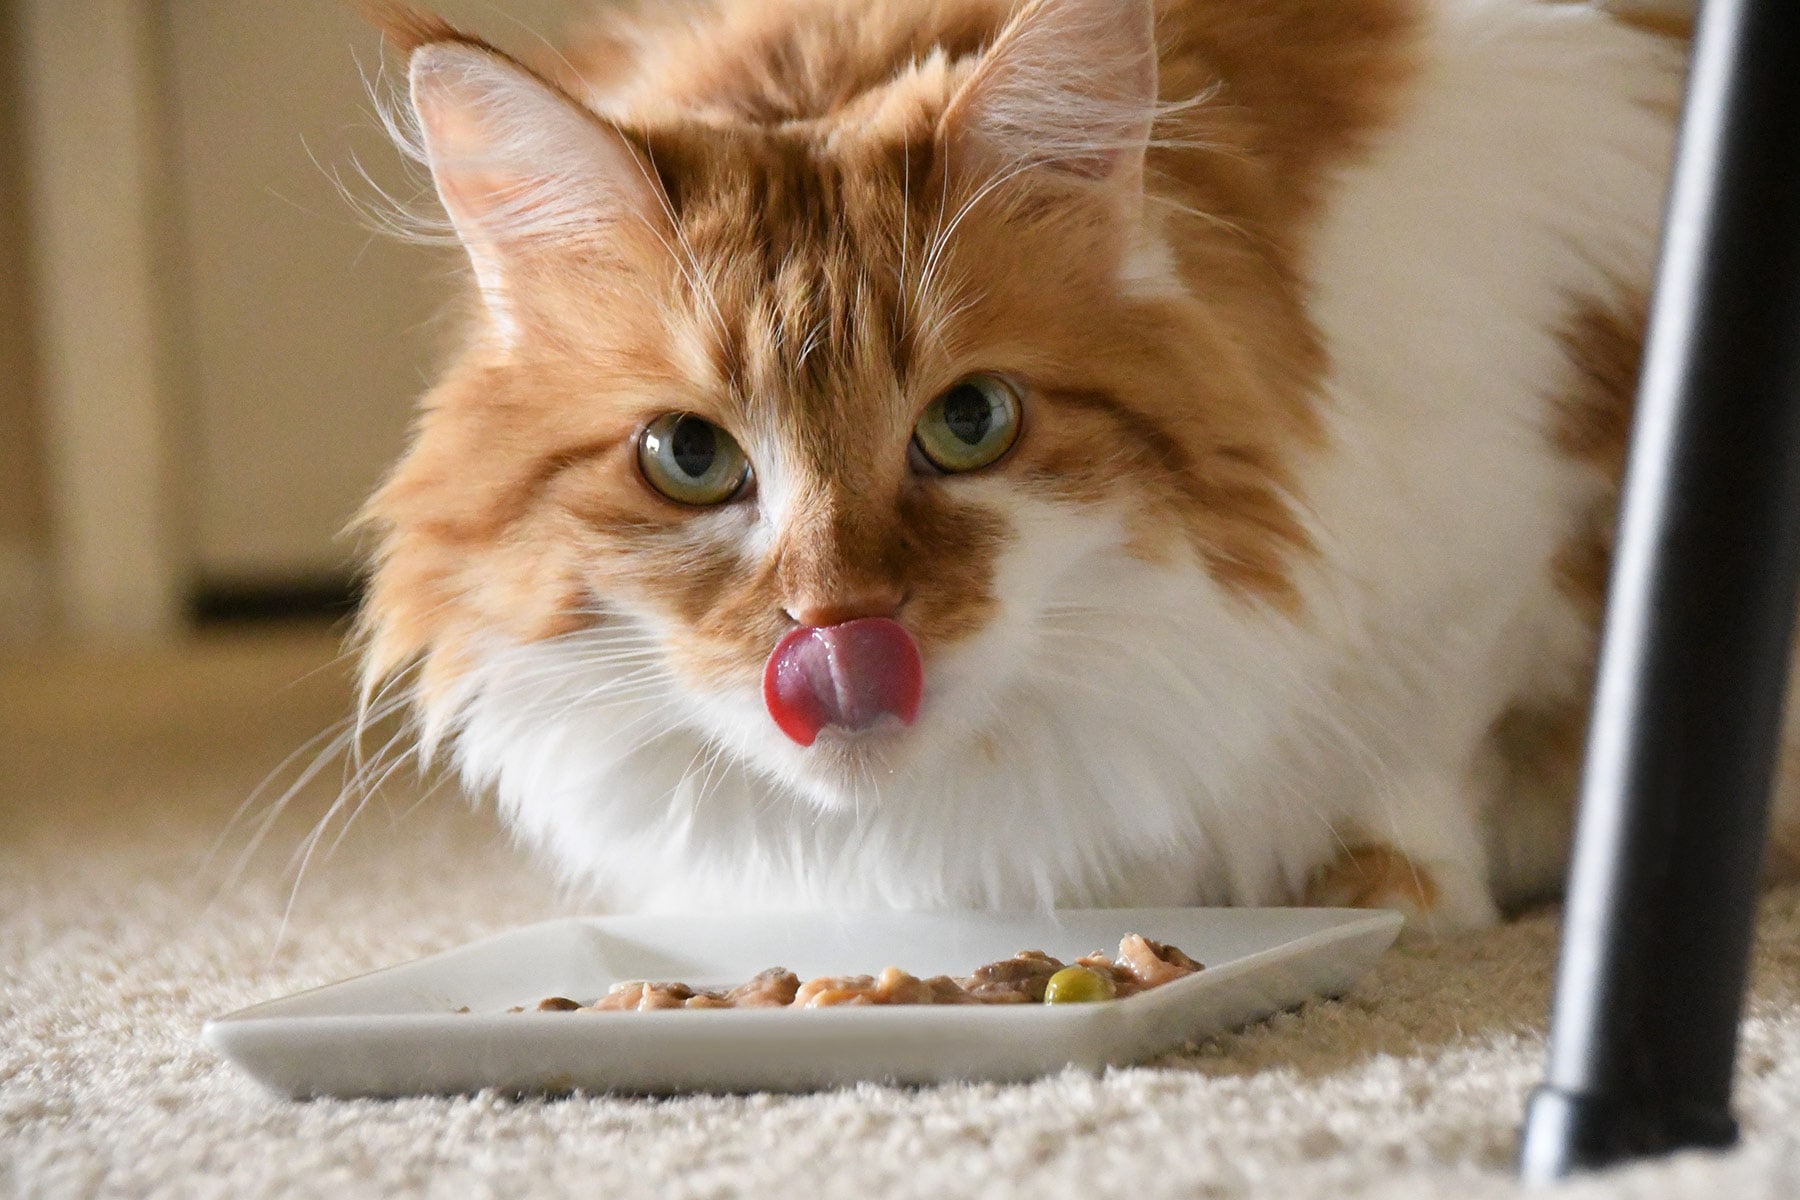 Can I switch my diabetic cat to a raw diet?